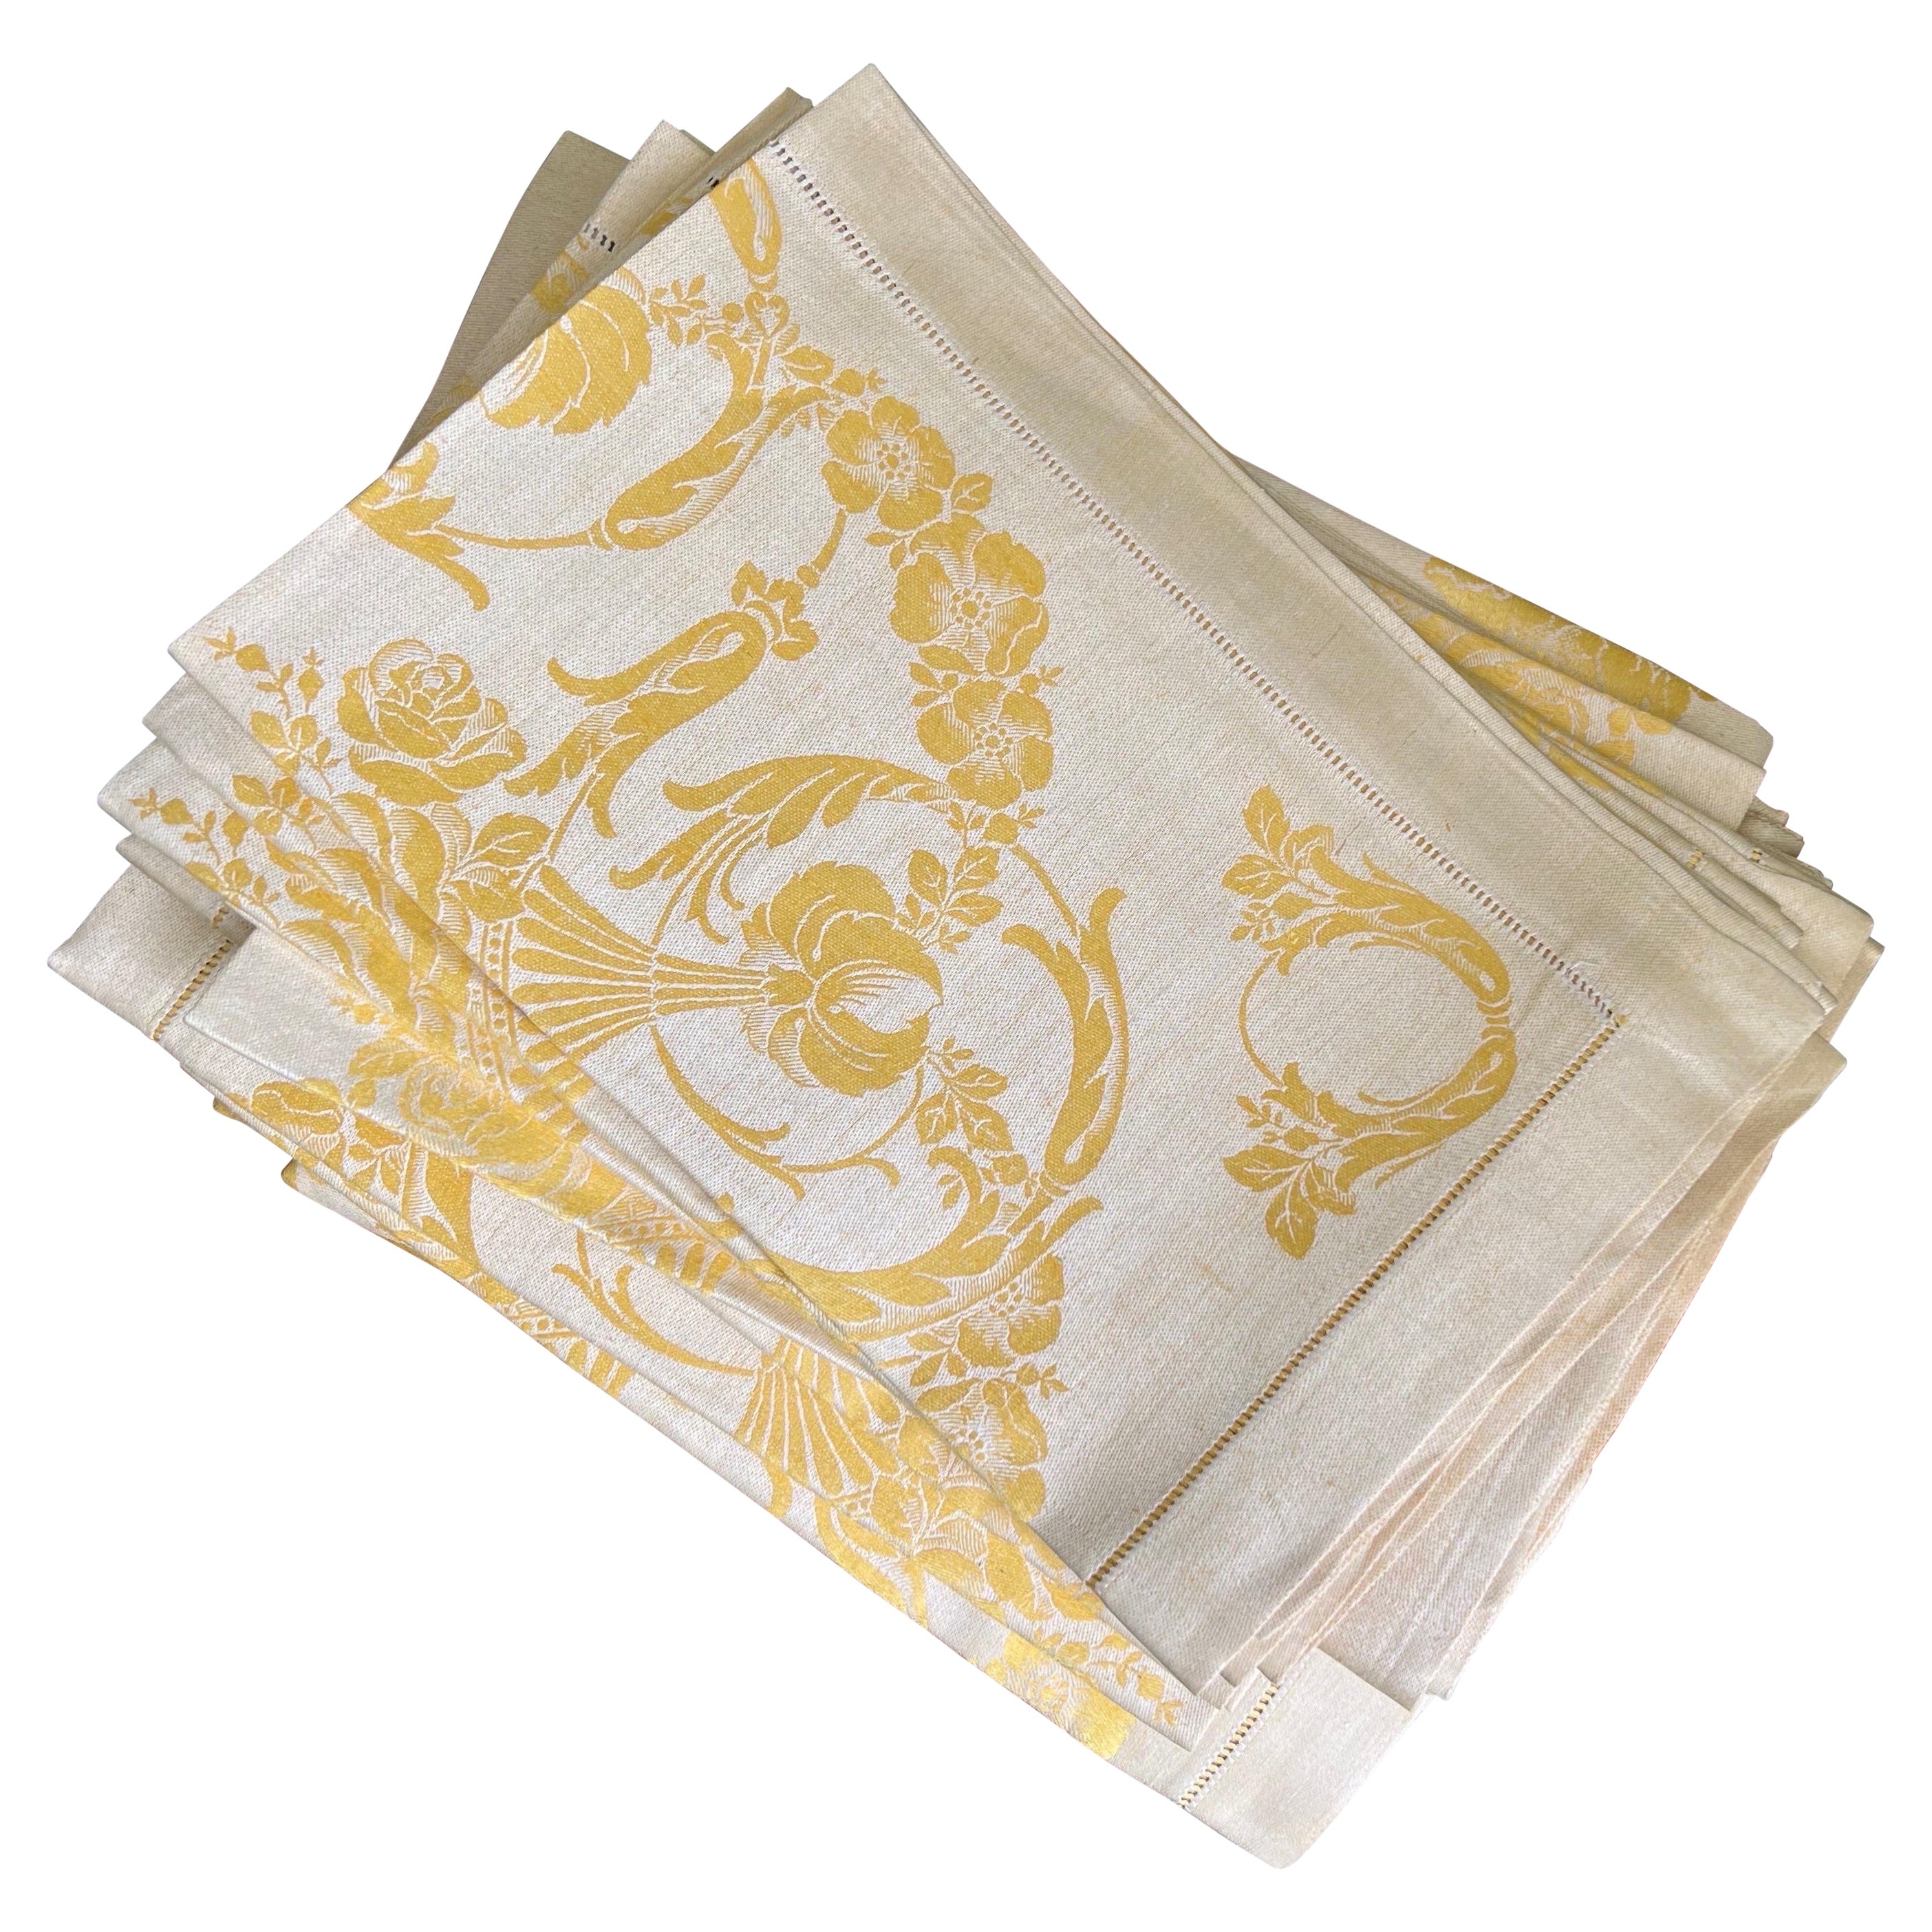 Two-Tone Canary Yellow Damask Polished Cotton Tablecloth and Napkins, 13 Pieces 